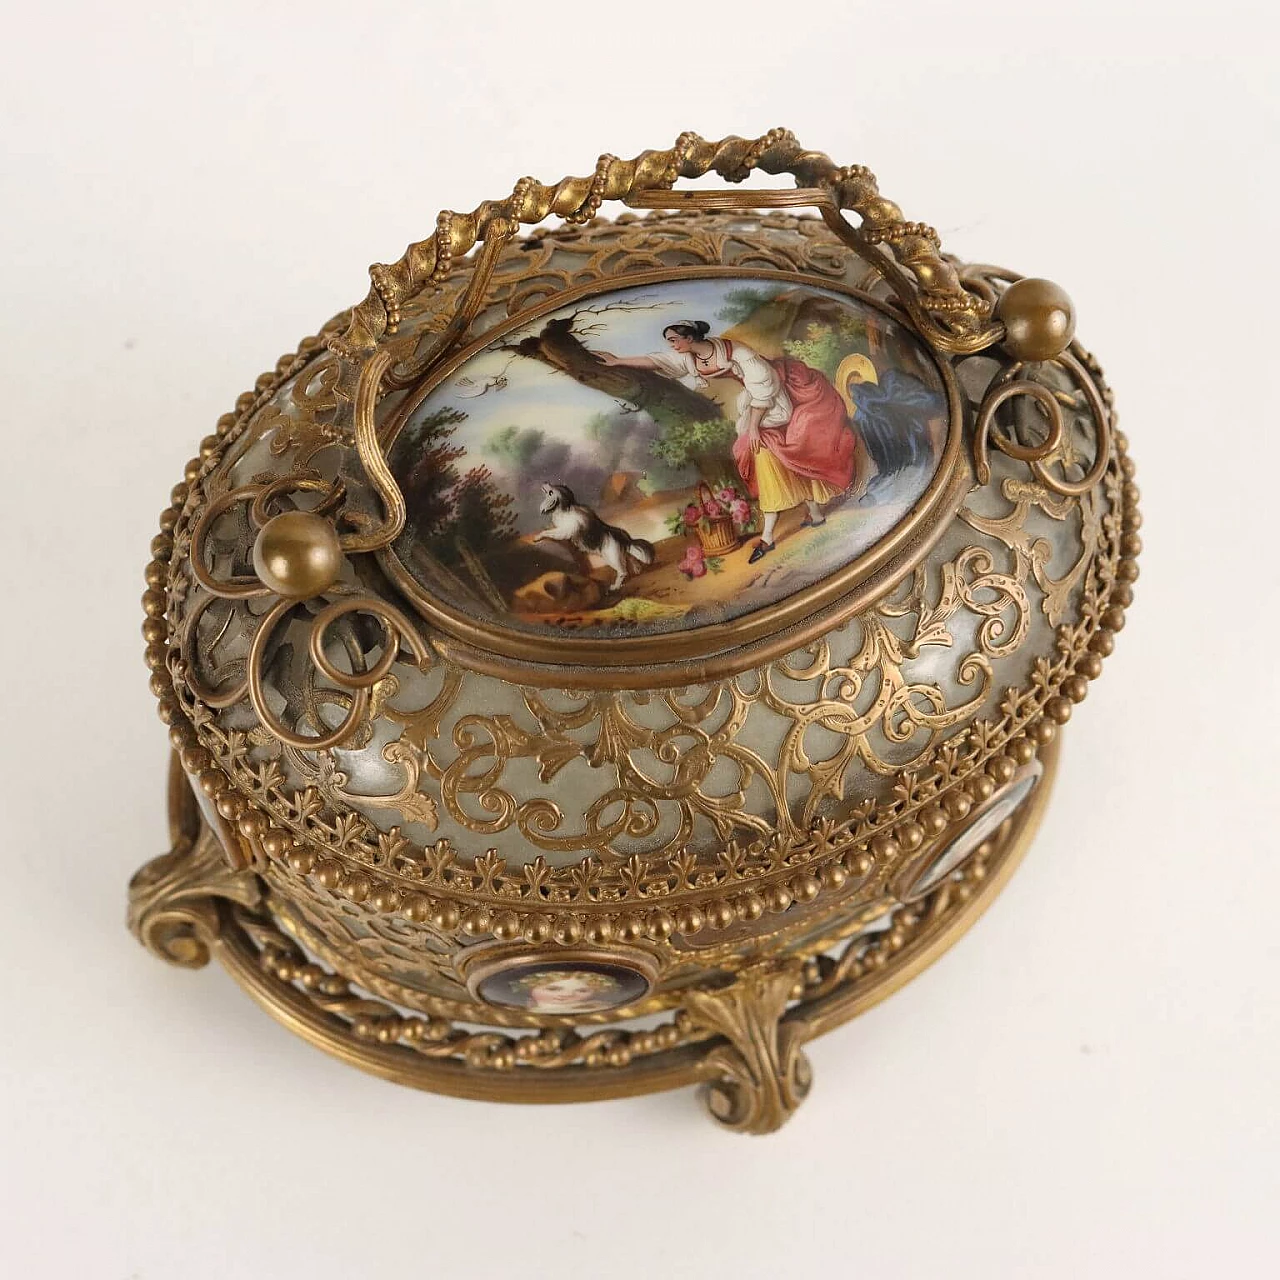 Bronze and glass jewellery box with painted porcelain, mid-19th century 8